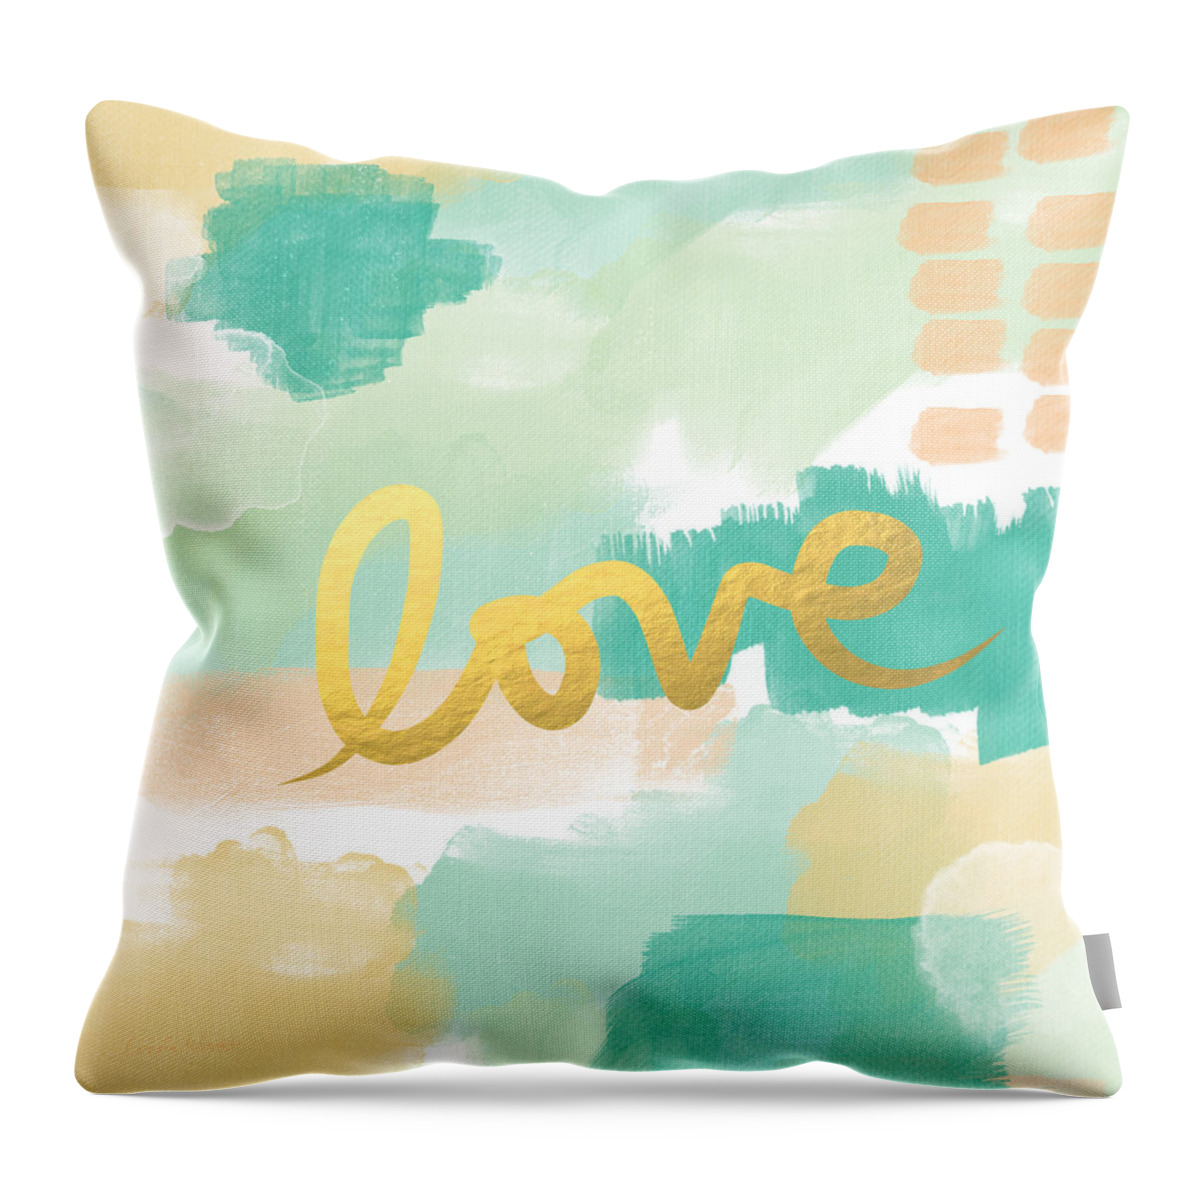 Abstract Throw Pillow featuring the painting Love with Peach and Mint by Linda Woods